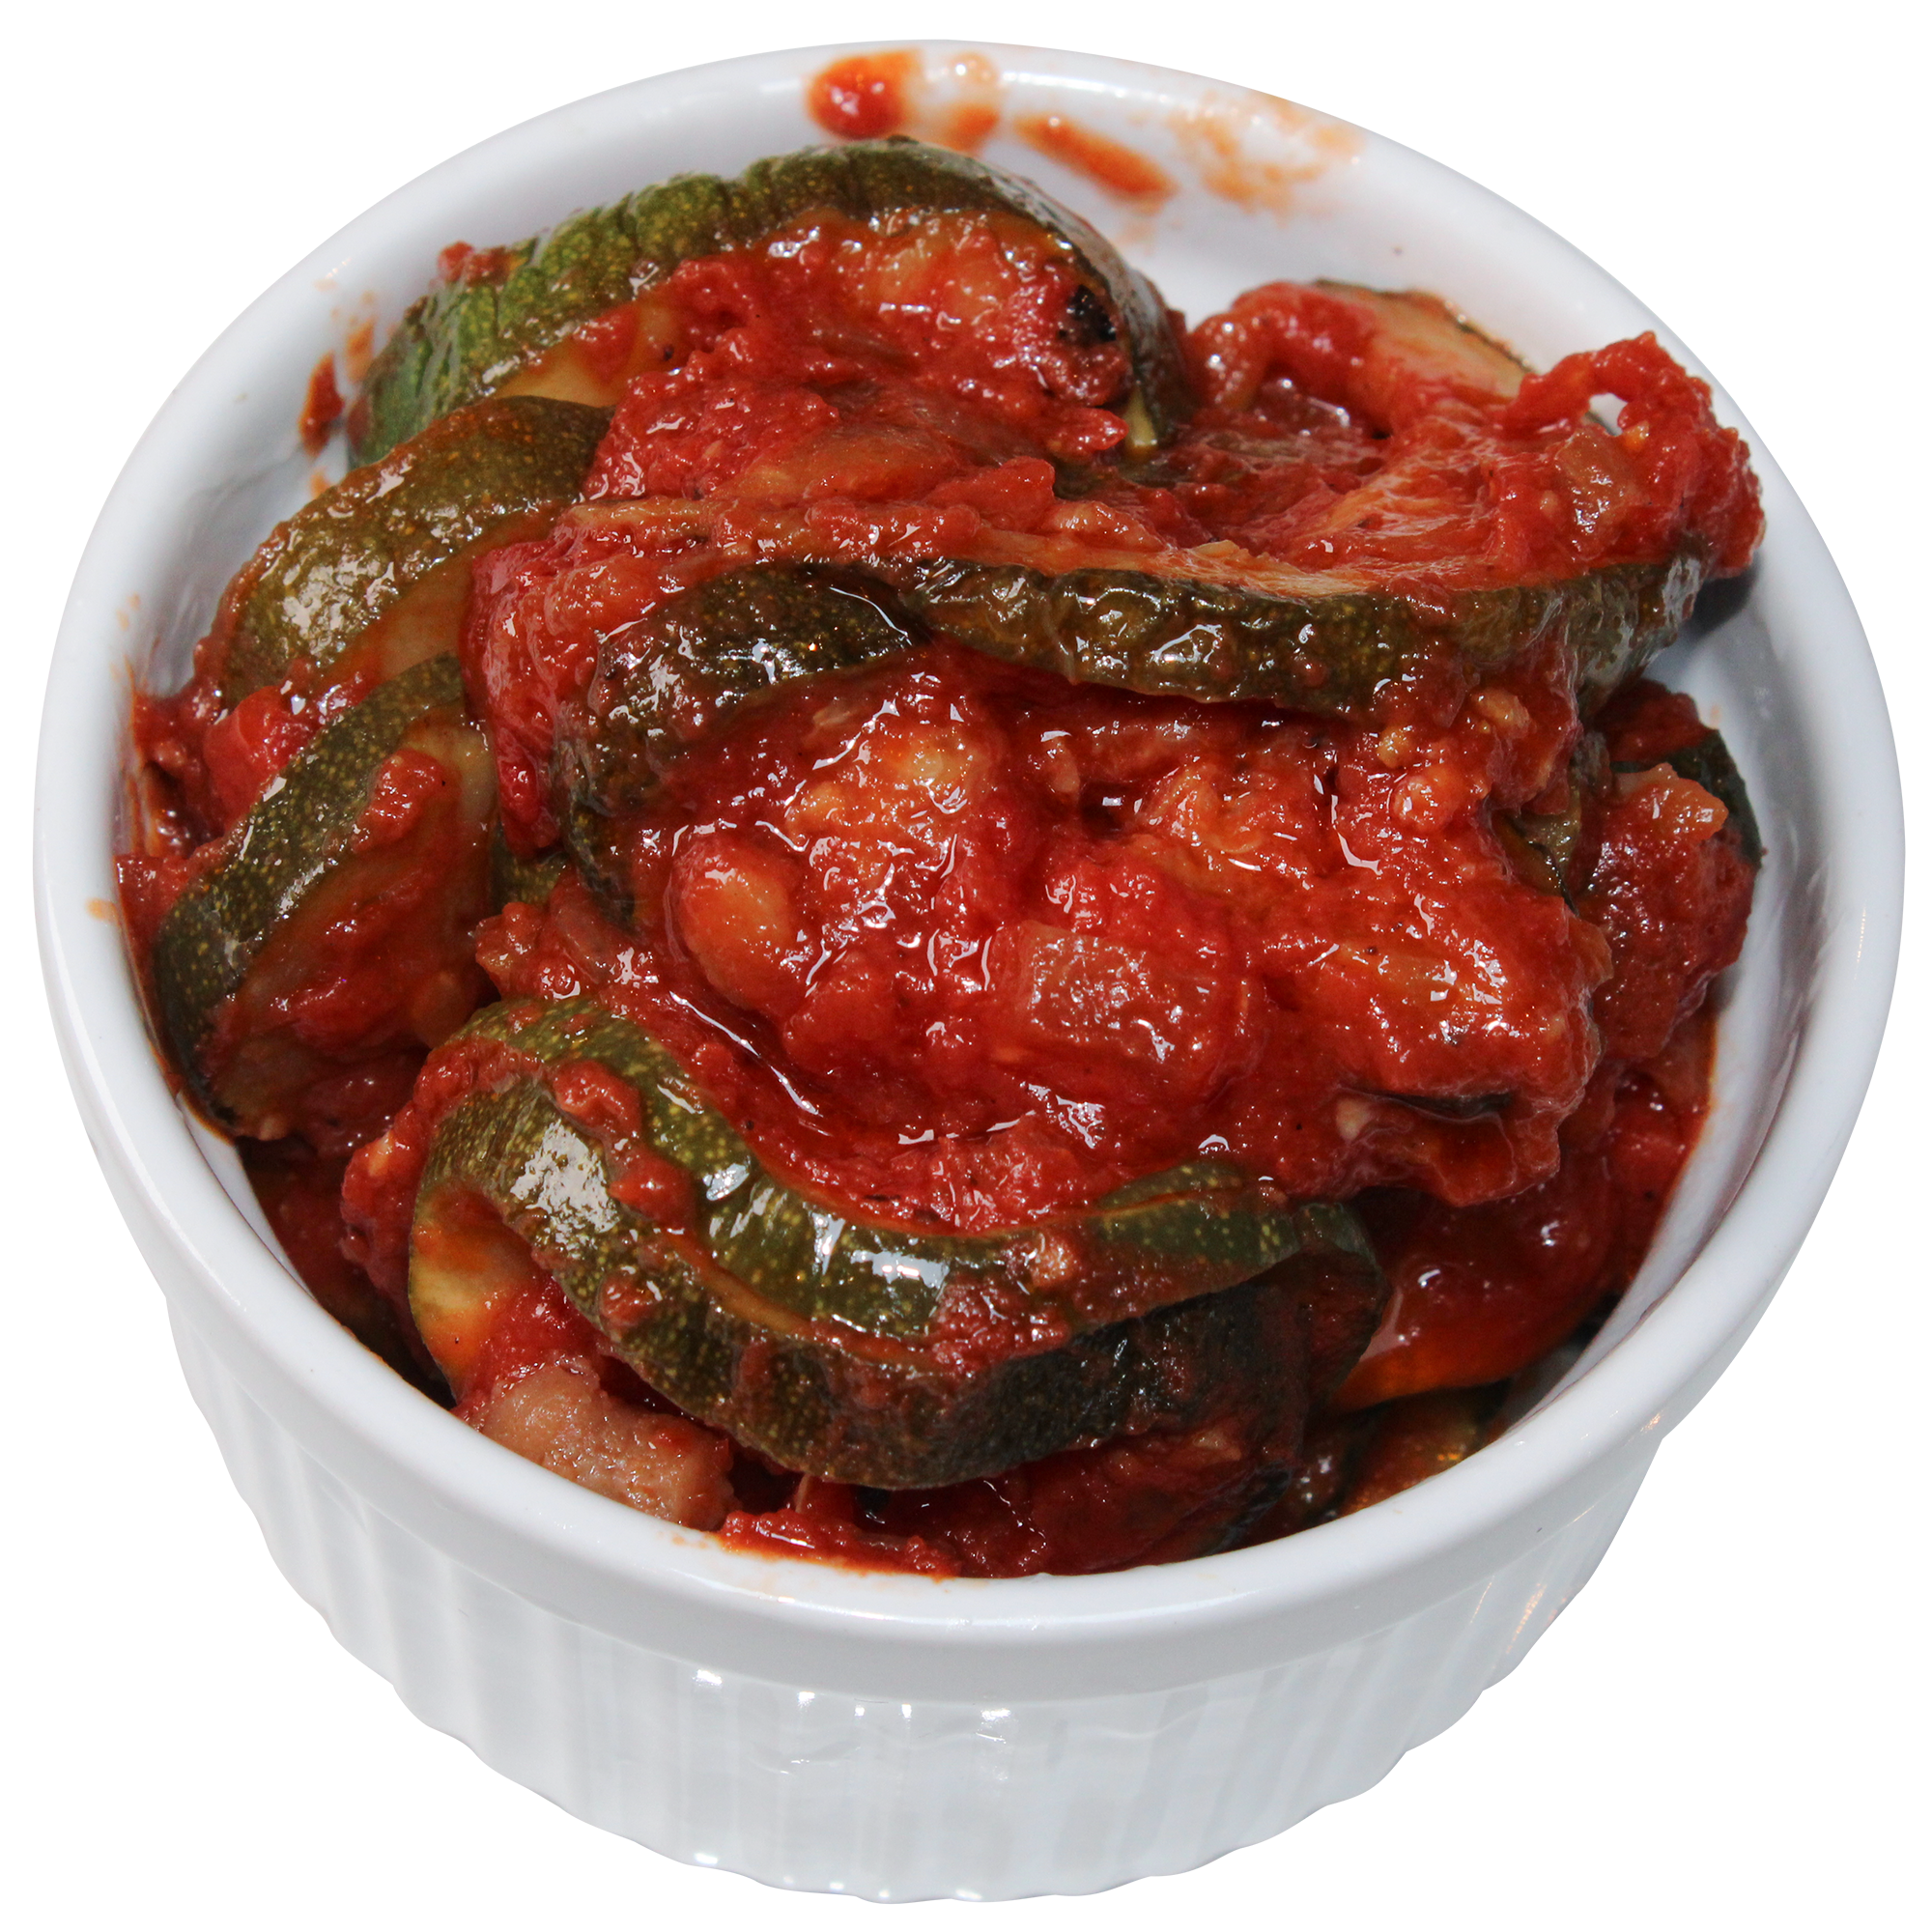 Courgettes in Tomato sauce